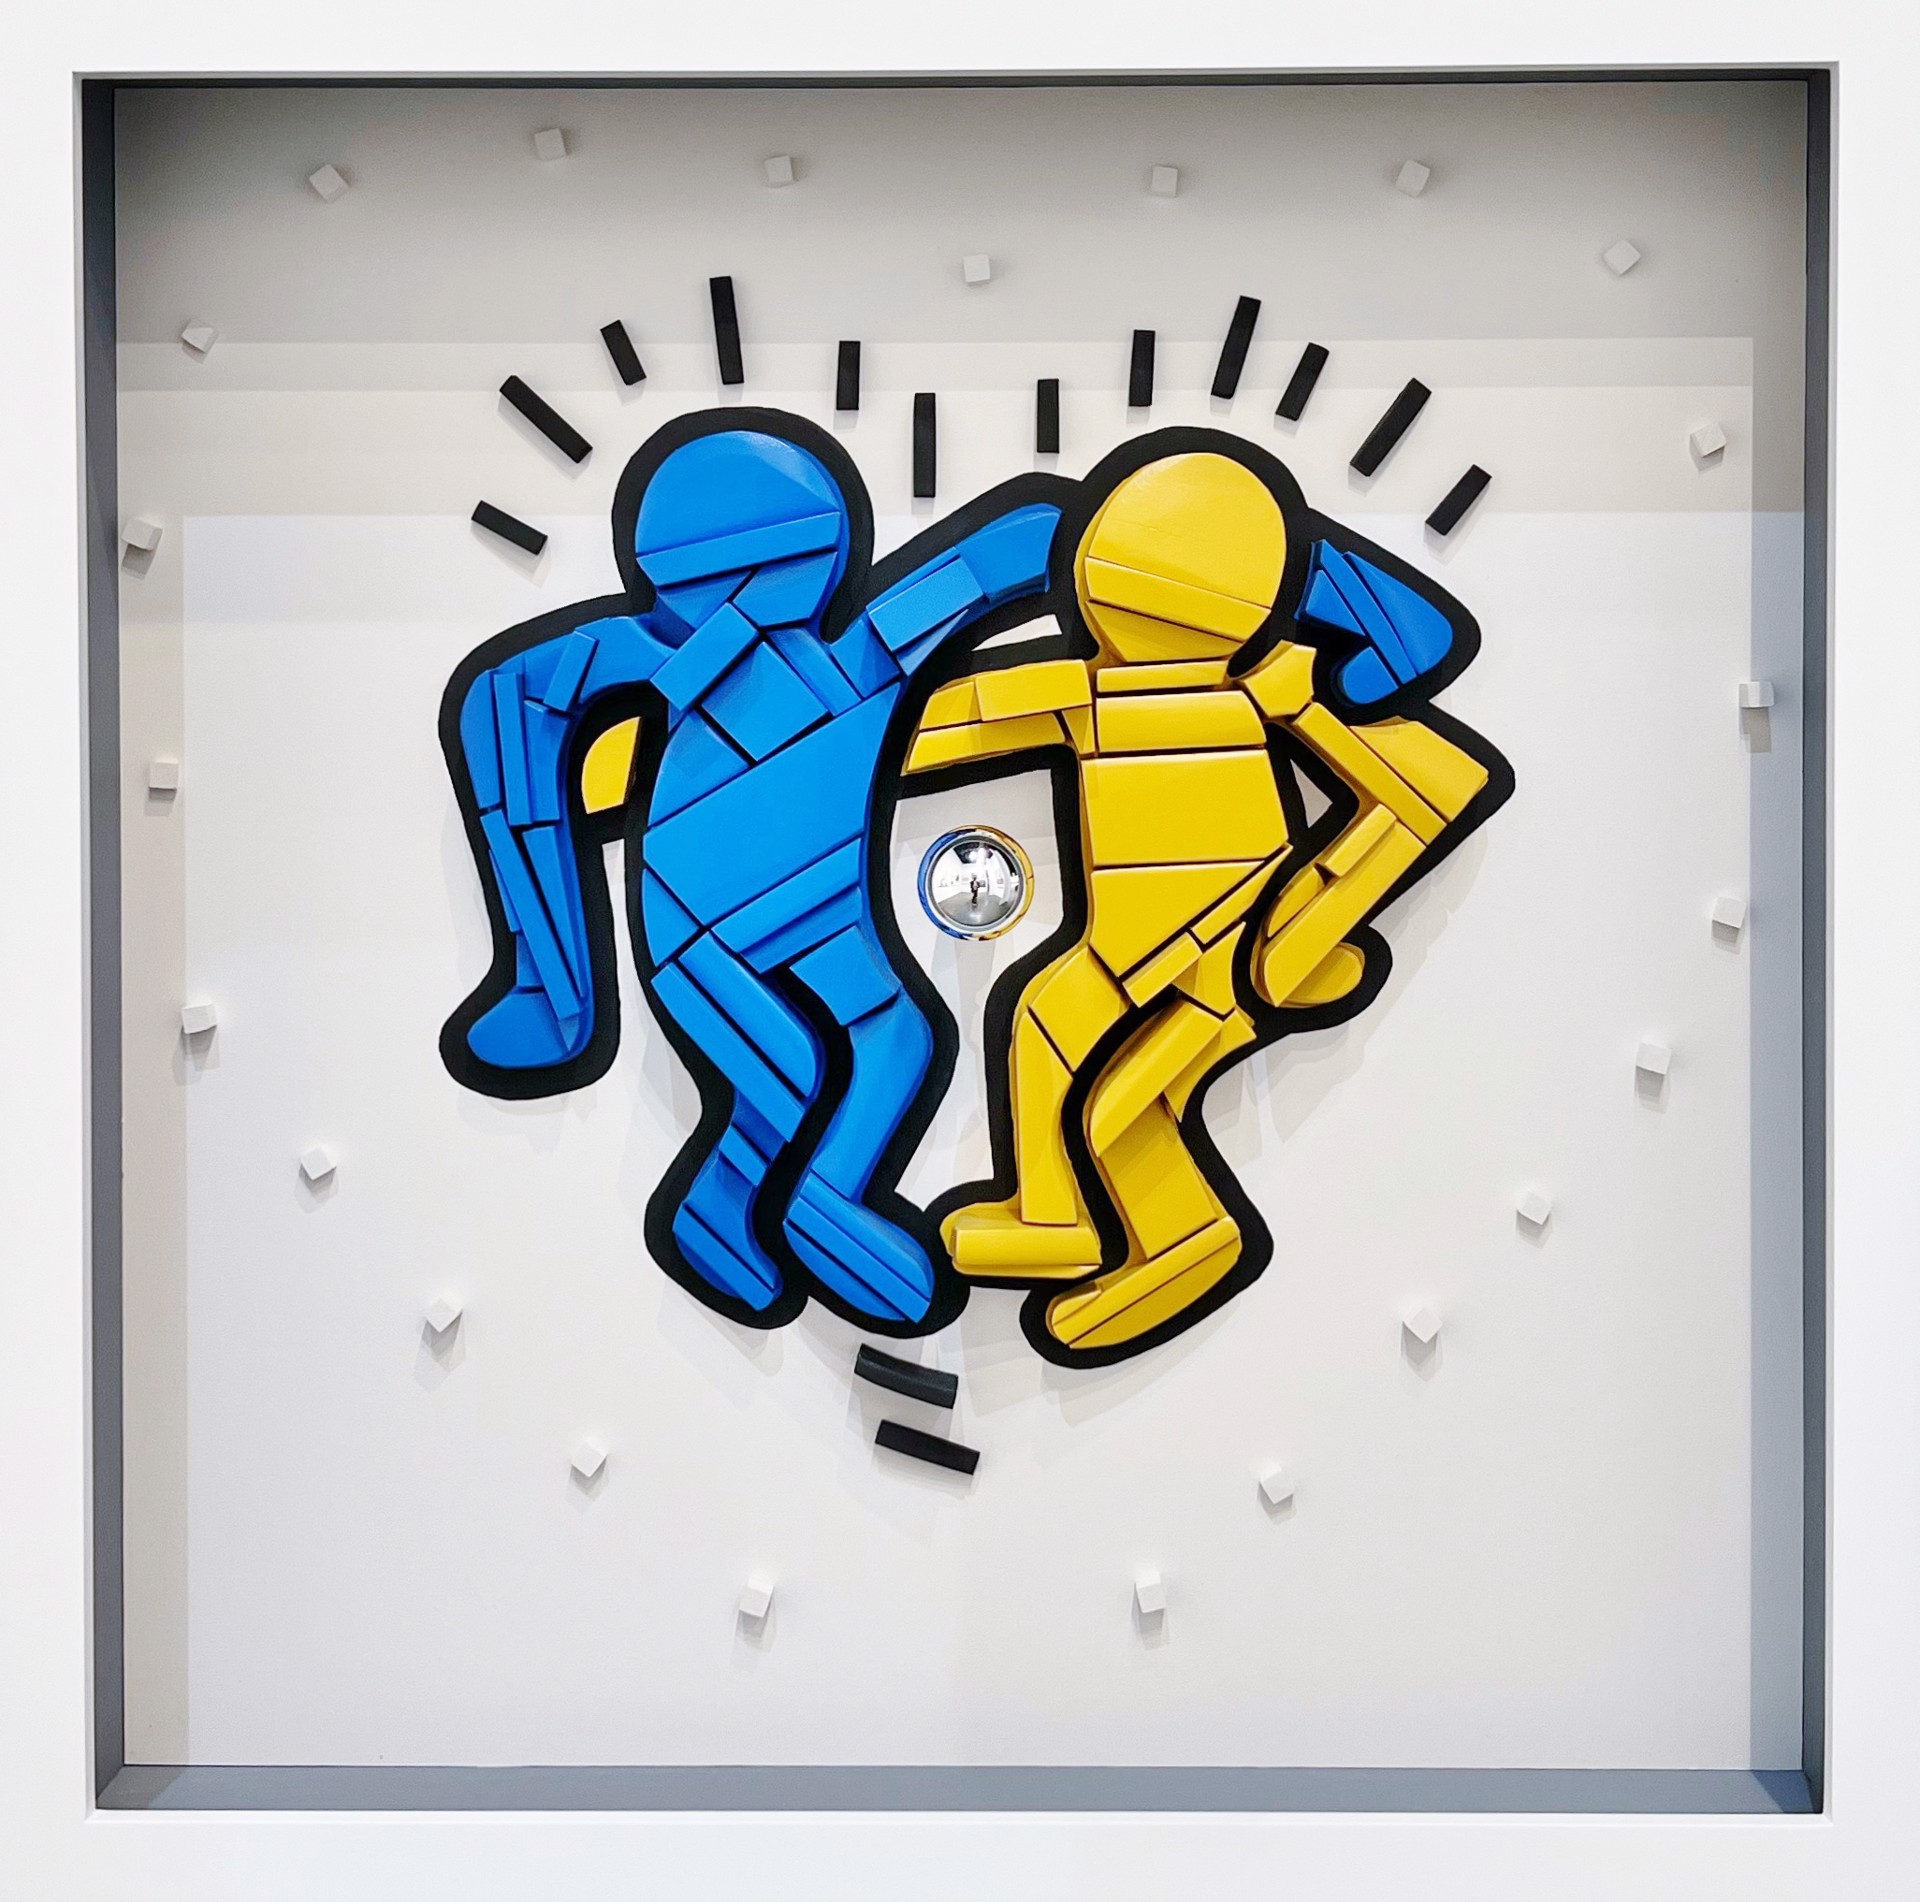 Buddy System II (Homage to Haring) by J.P. Goncalves, Silhouette